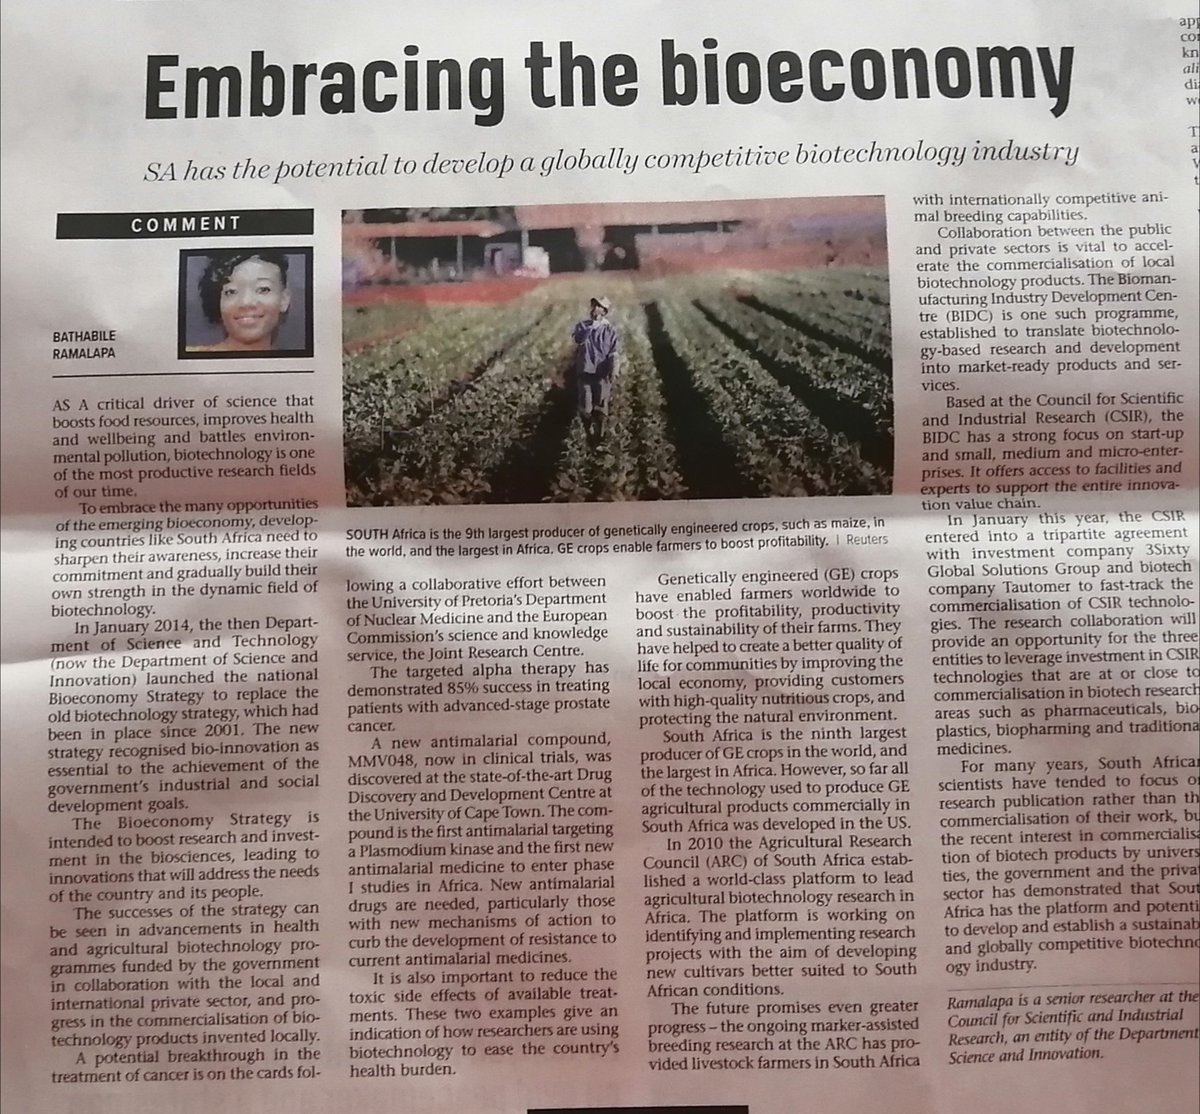 Your girl is on page 9 of today's Pretoria News discussing  prospects of the Biotechnology industry in South Africa.
Me... I am your girl 👑
#WomenInSceince
#biotechnology